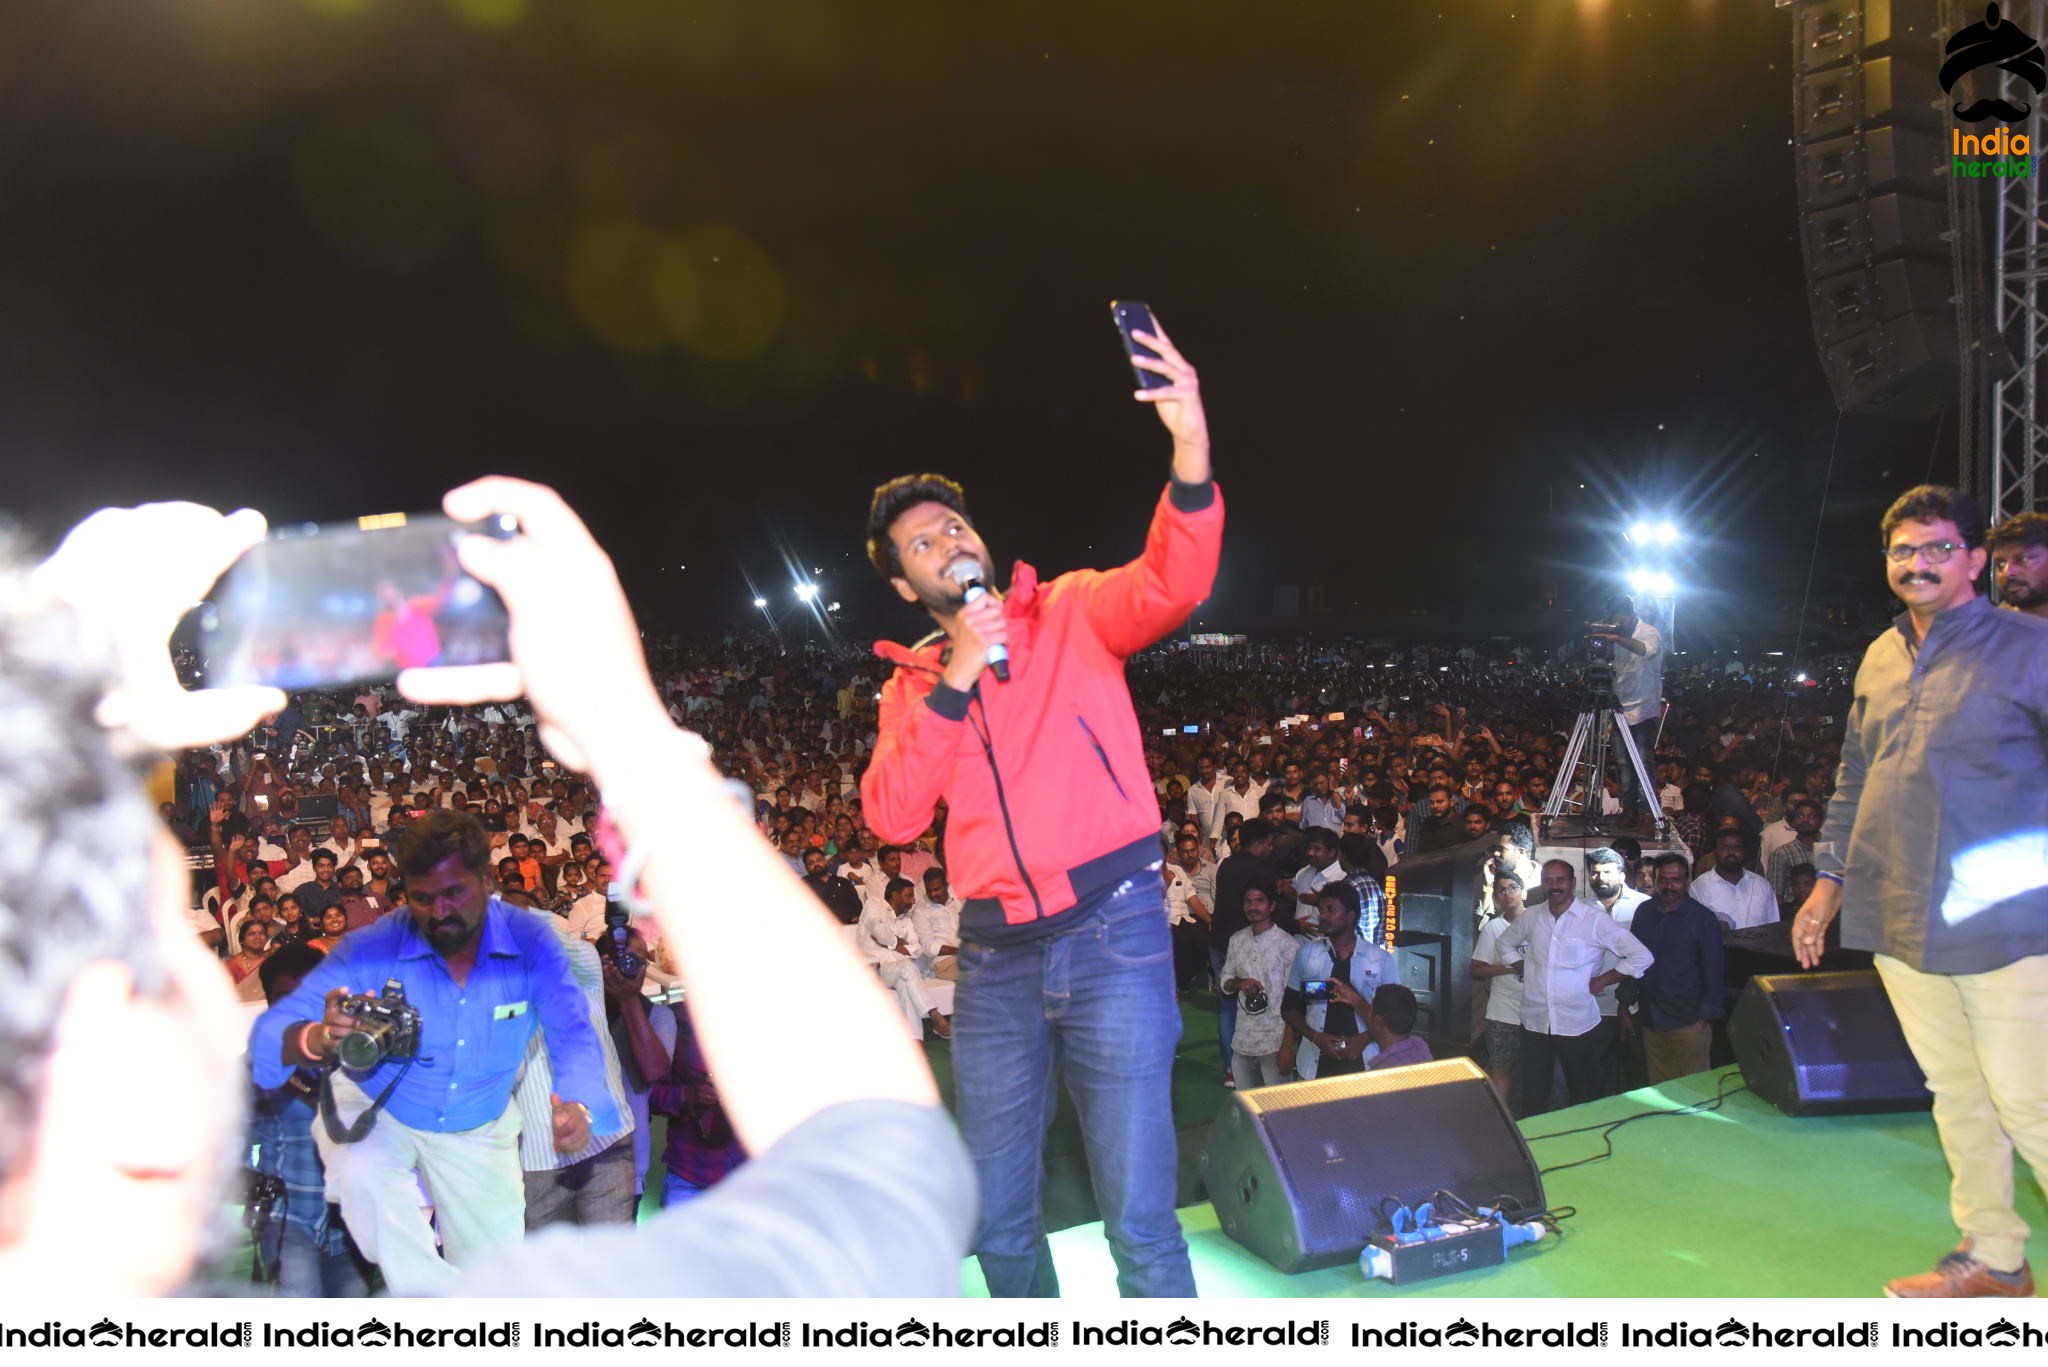 Actor Sundeep Kishan Taking Selfies with the Cast and the Crowd Set 2